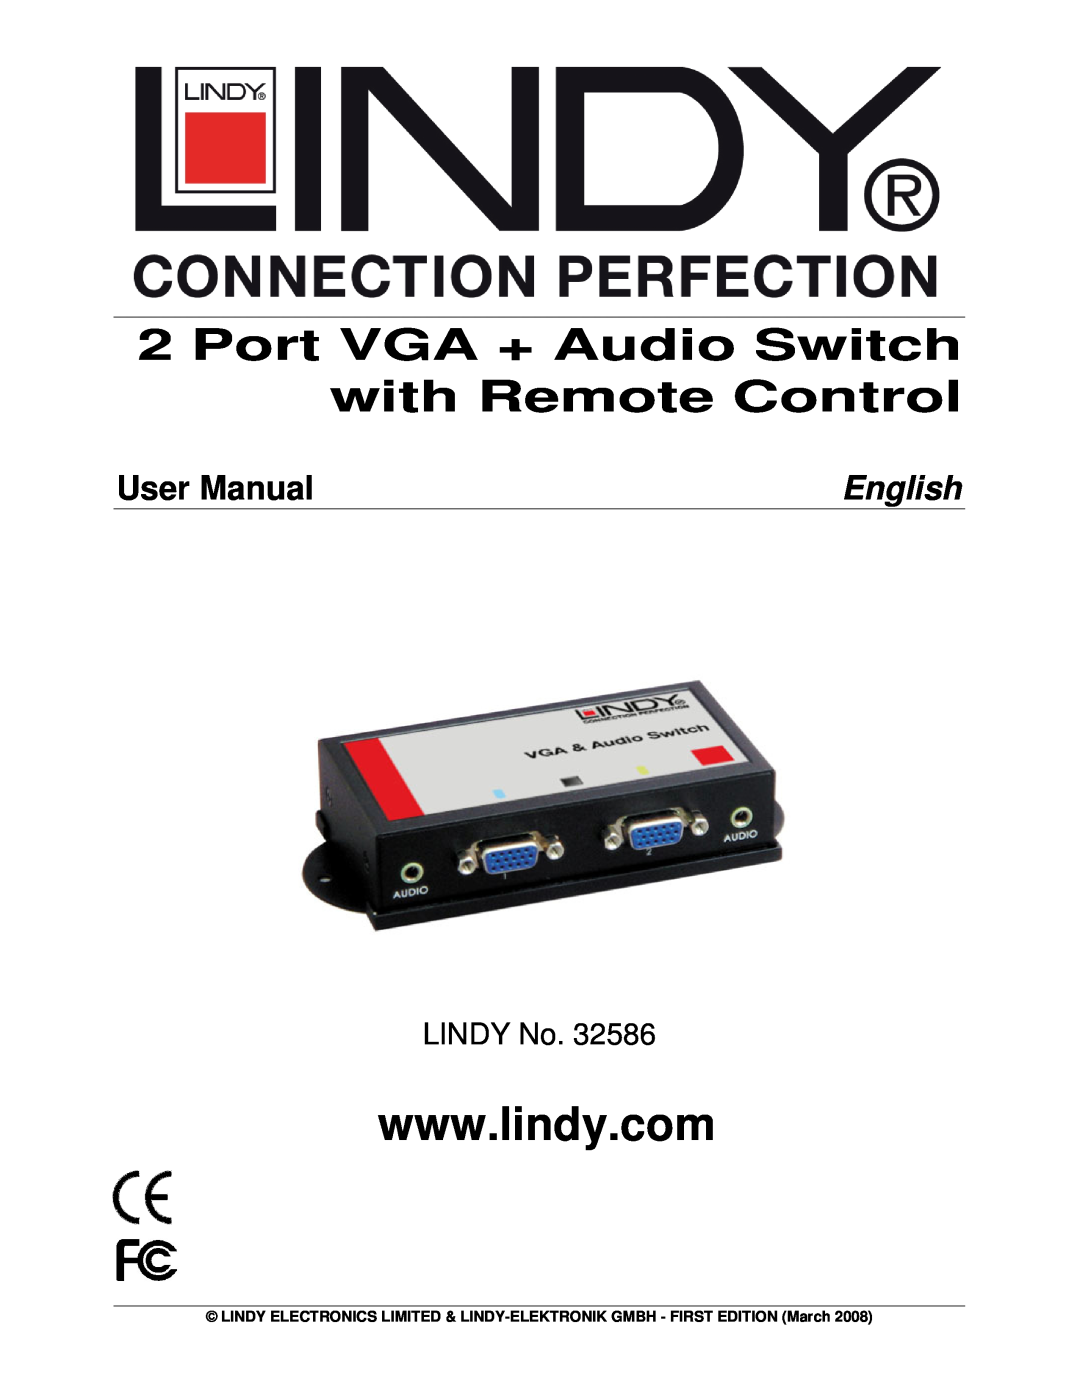 Lindy 32586 user manual Port VGA + Audio Switch with Remote Control, User Manual, English, LINDY No 